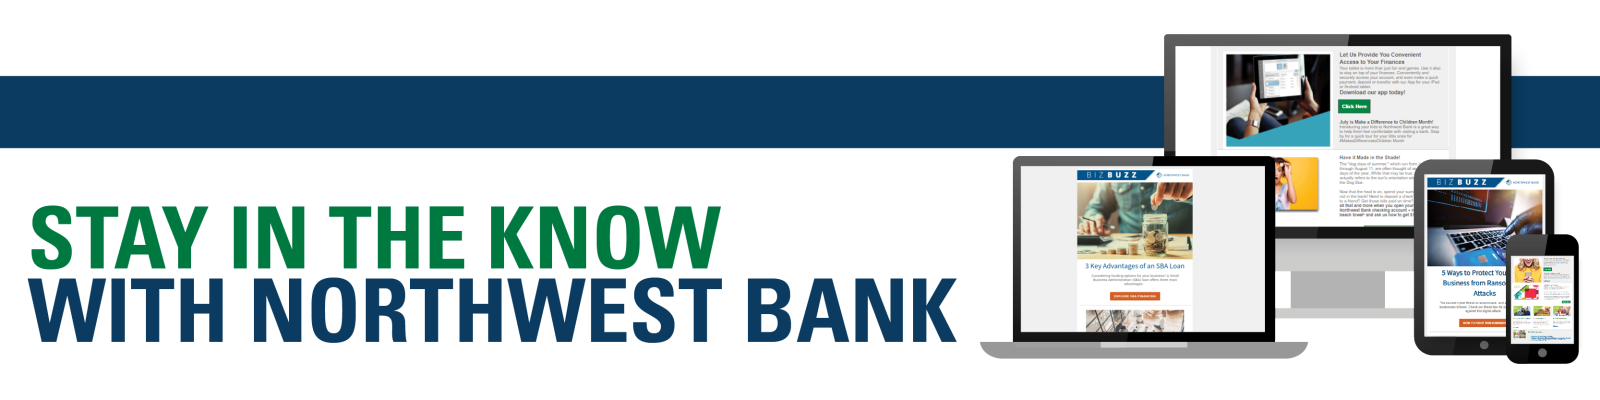 Stay in the Know with Northwest Bank